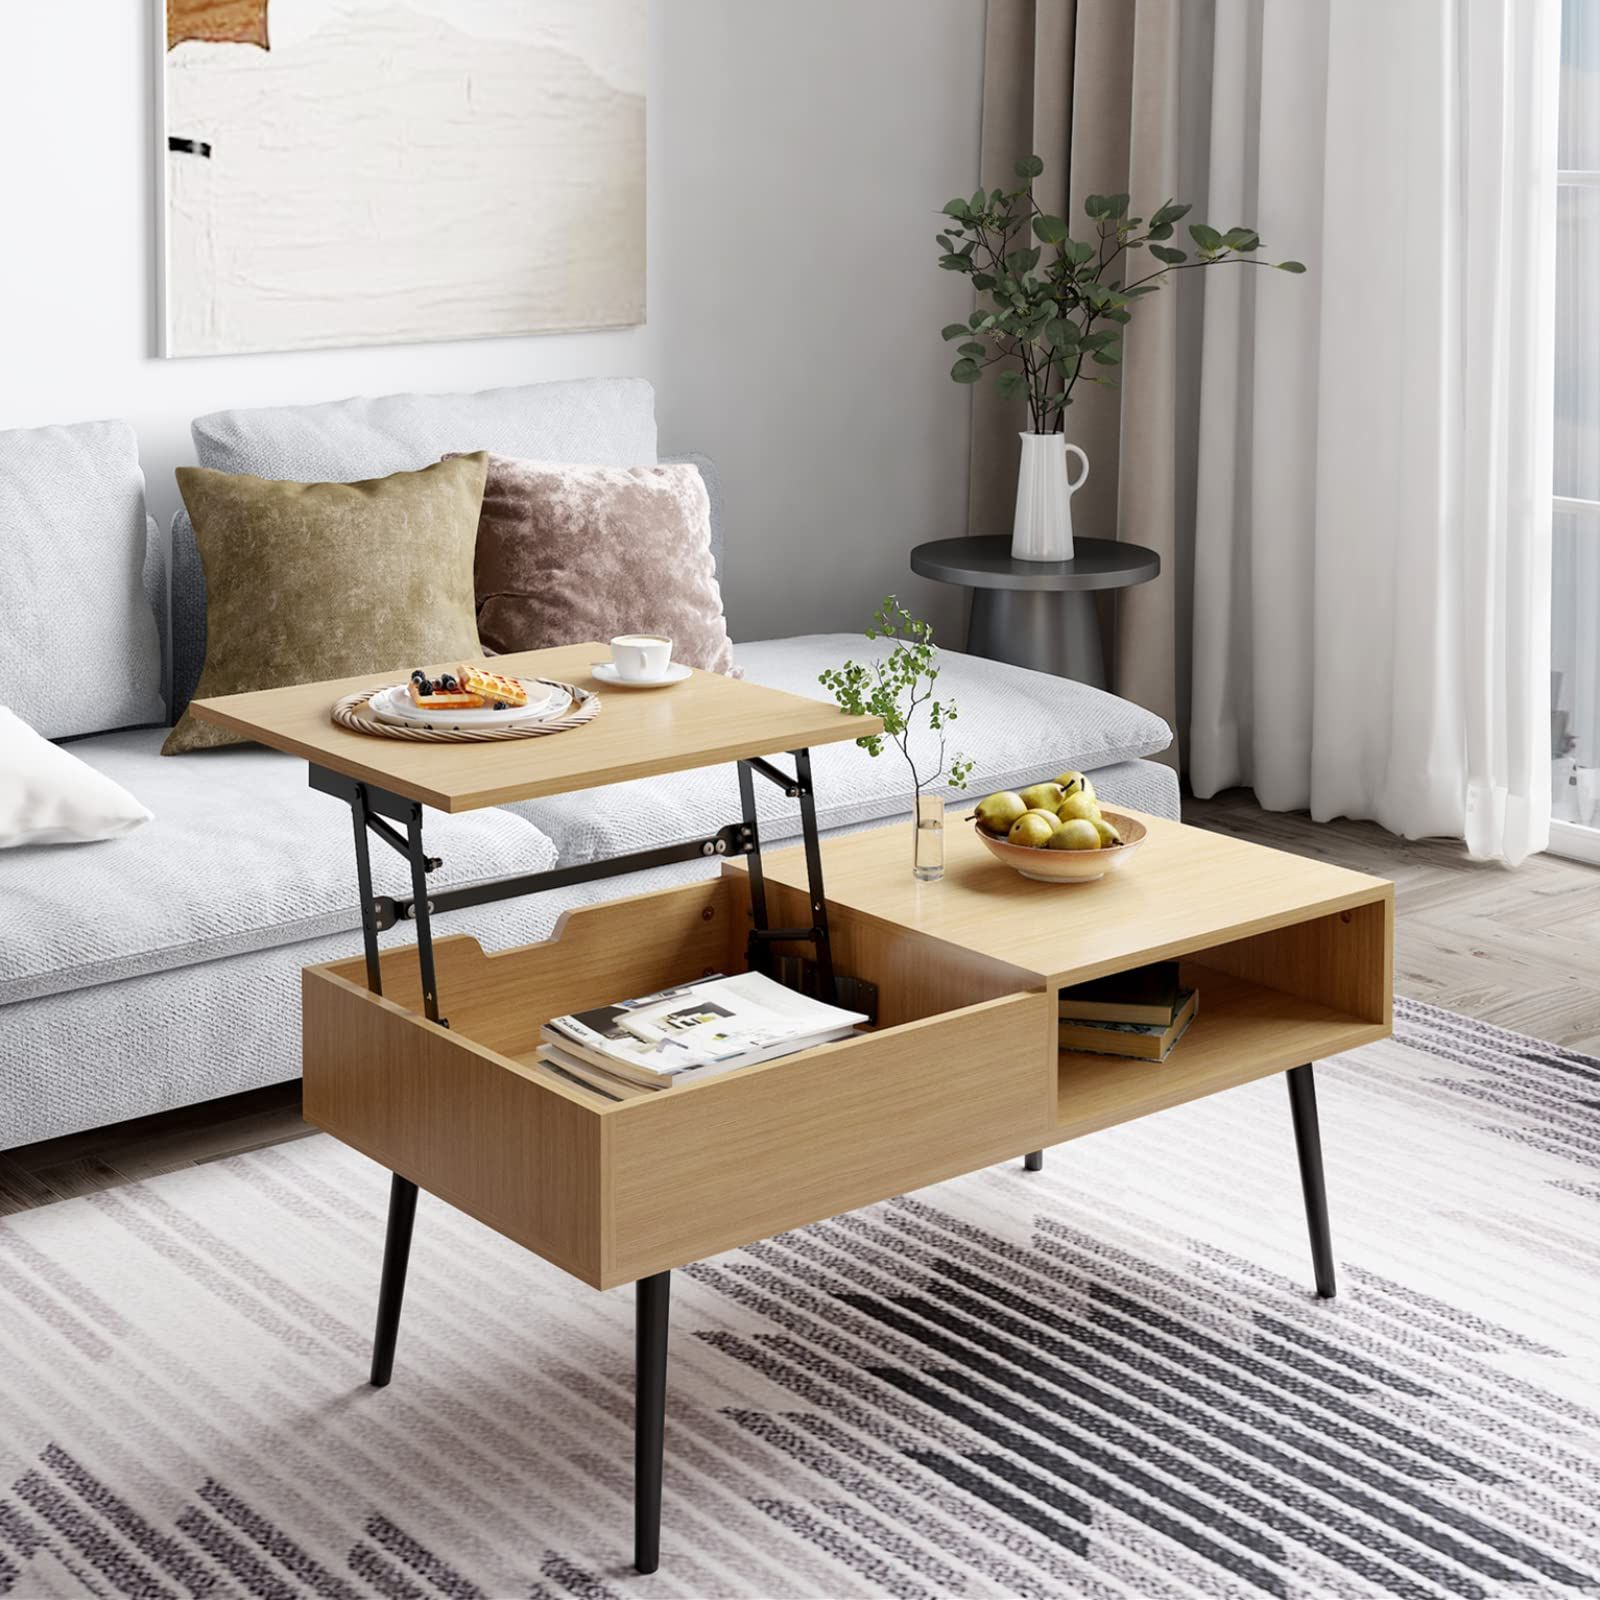 Most Recent Modern Wooden Lift Top Tables Pertaining To Amazon: Coffee Table Living Room Tables – Lift Top Coffee Table With  Storage 39", Modern Adjustable Wood Rising Center Table With Hidden  Compartment (wood) : Home & Kitchen (Photo 2 of 10)